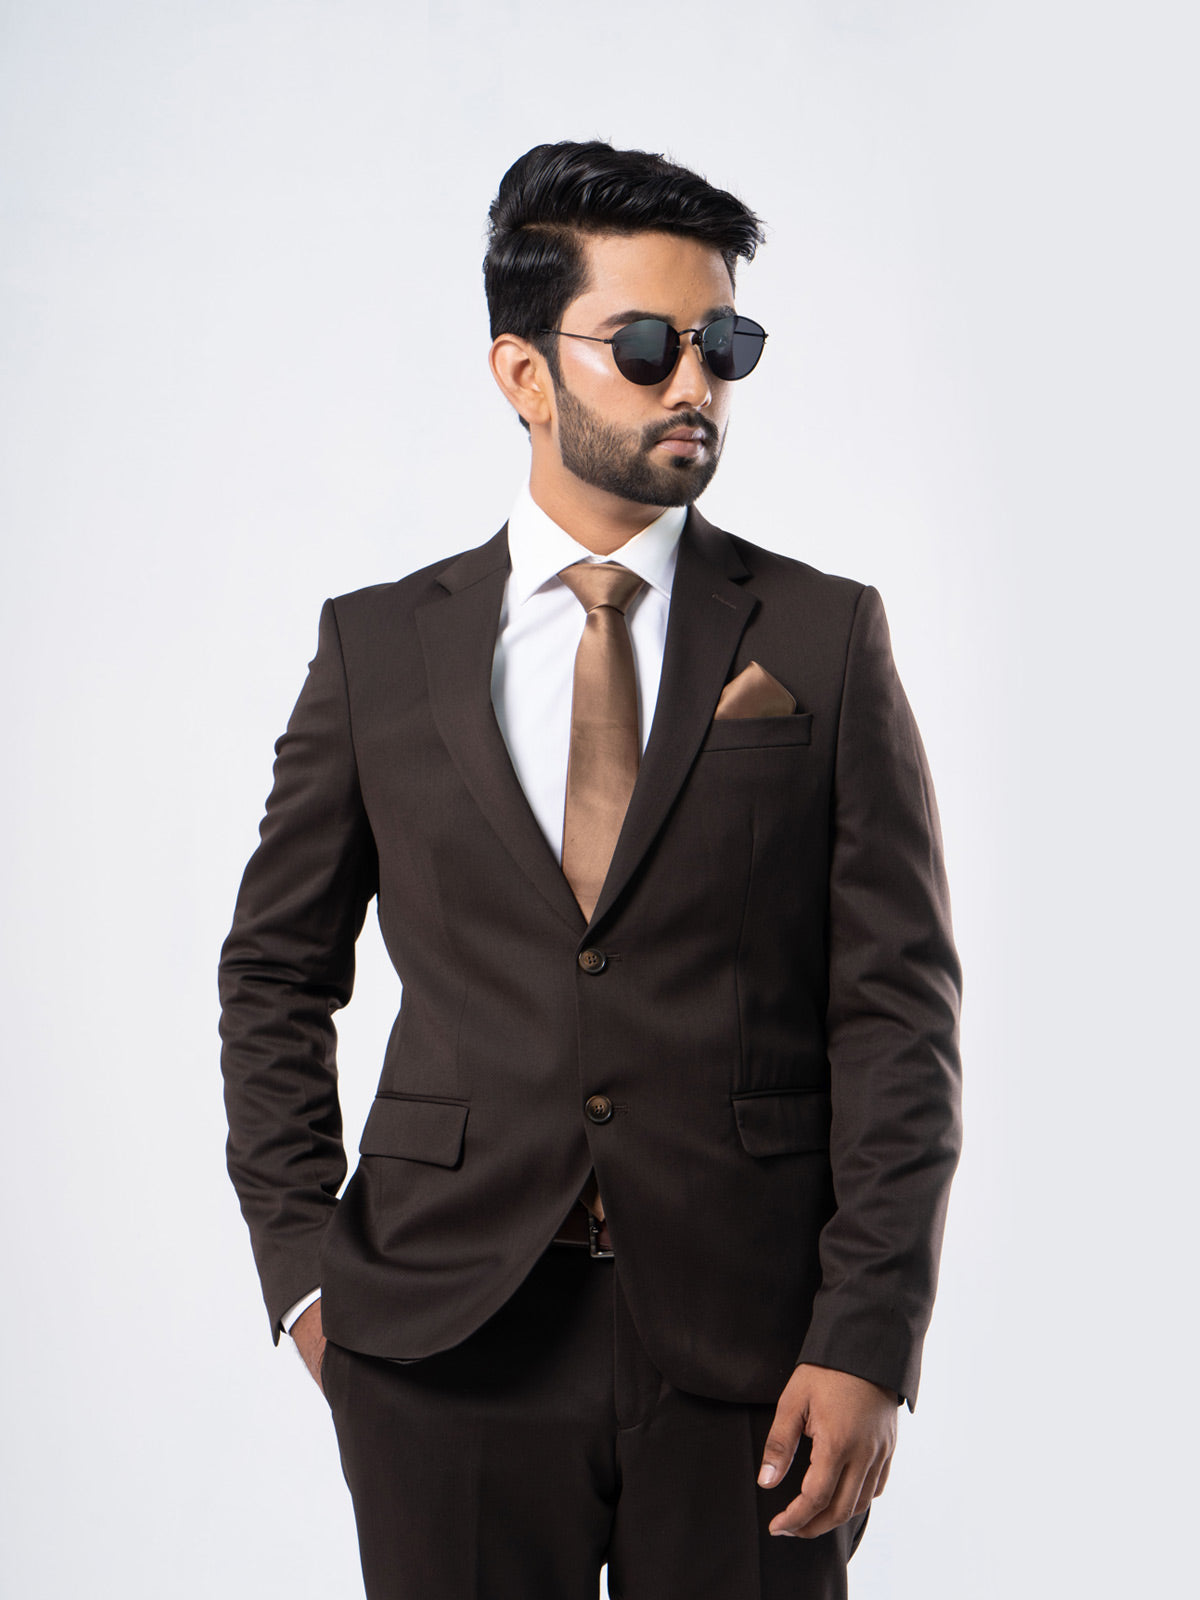 Chocolate Notch Lapel Brown Groom Tuxedo Suit For Weddings And Business  Includes Jacket, Pants, Tie, And Vest Style 1668 From Good Happy, $85.6 |  DHgate.Com